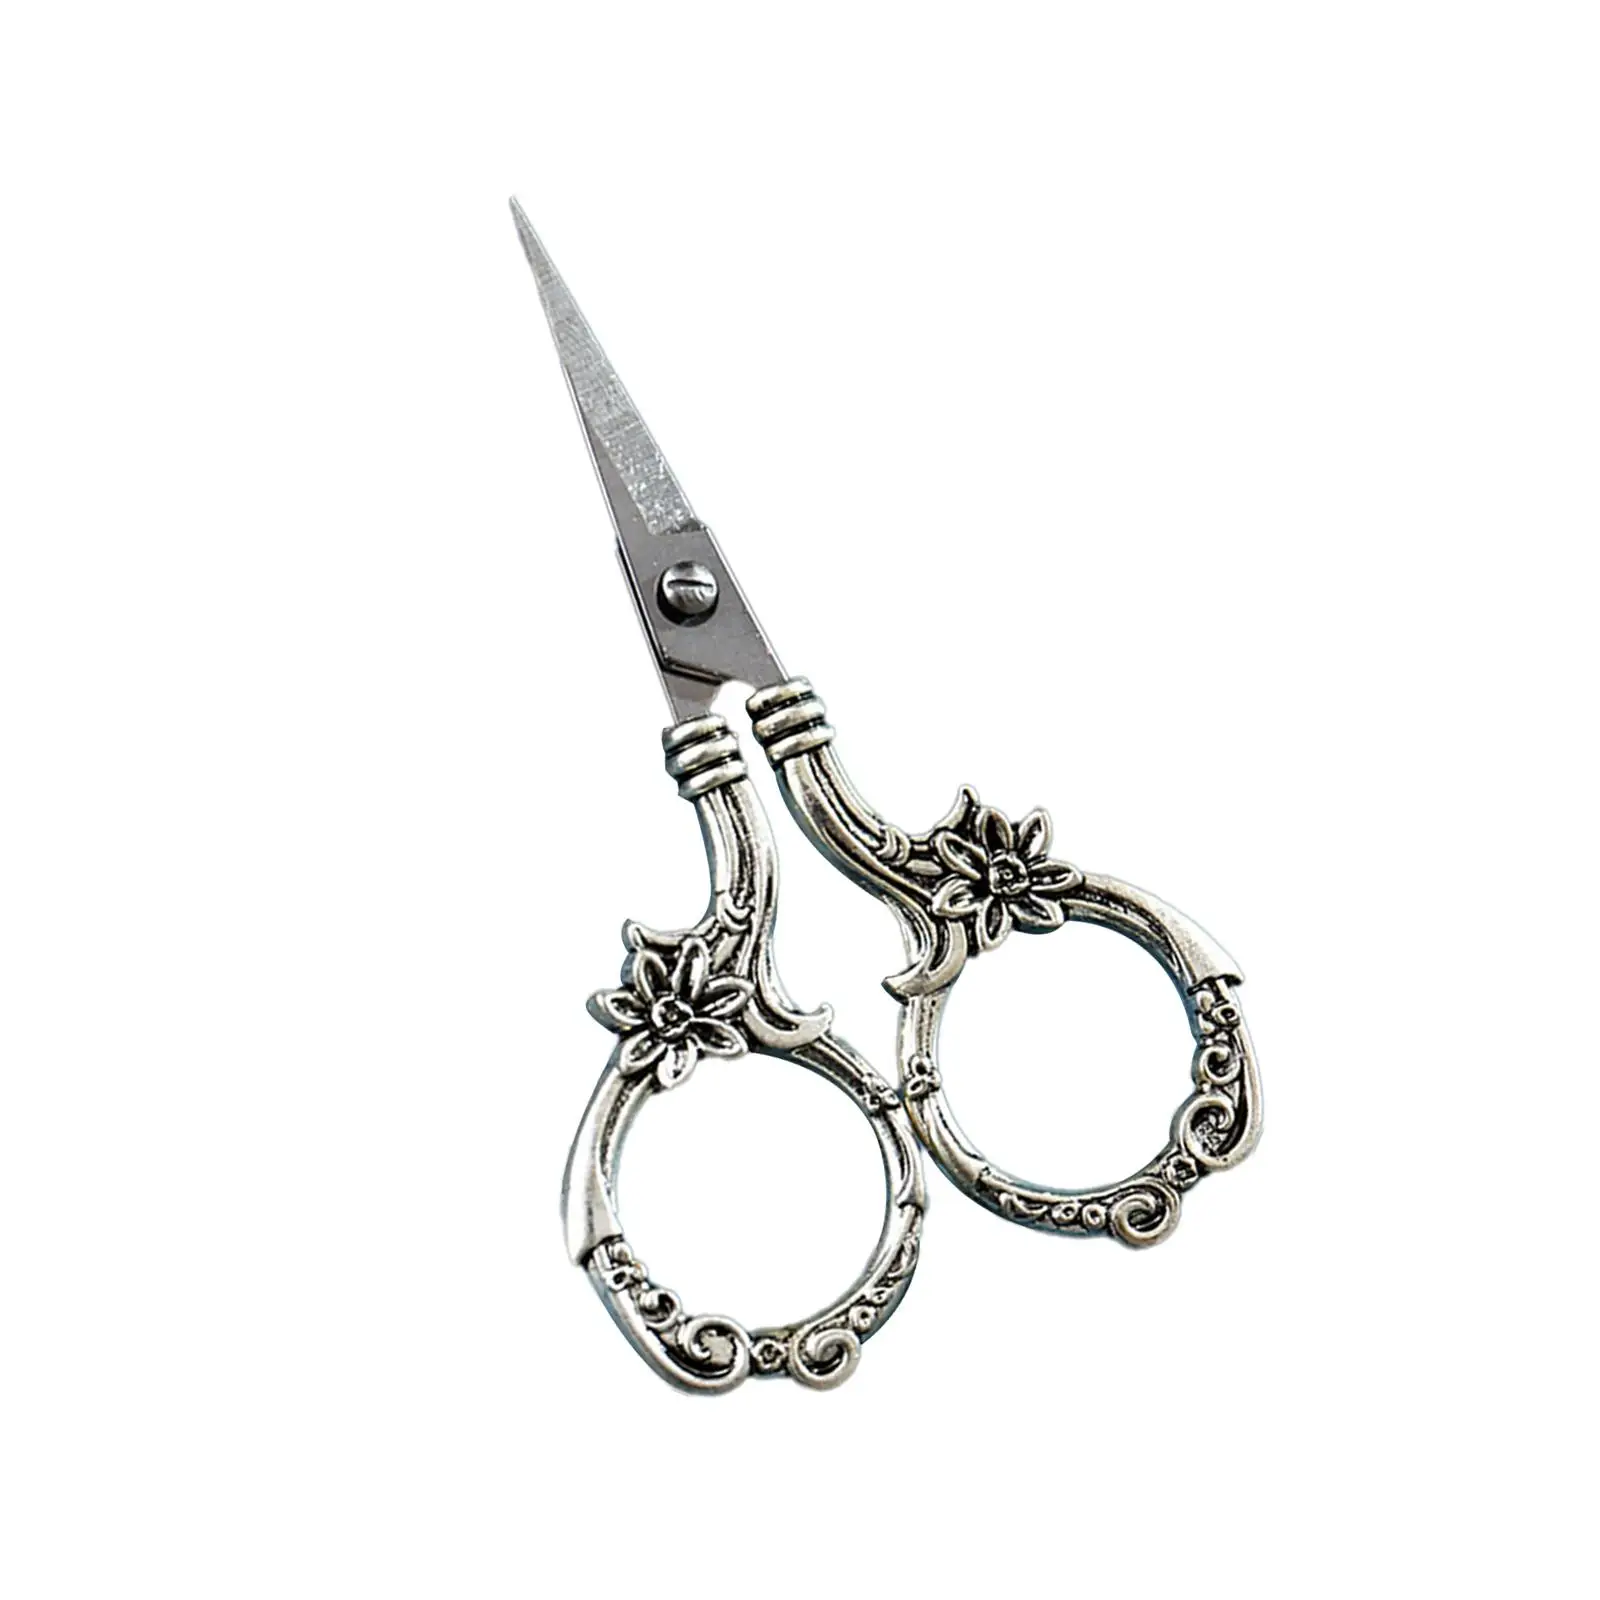 Embroidery Scissors Classic Multifunction Manual Tool Durable Sharp Tailor Scissors for Cross Stitch Shear Home Cutting DIY